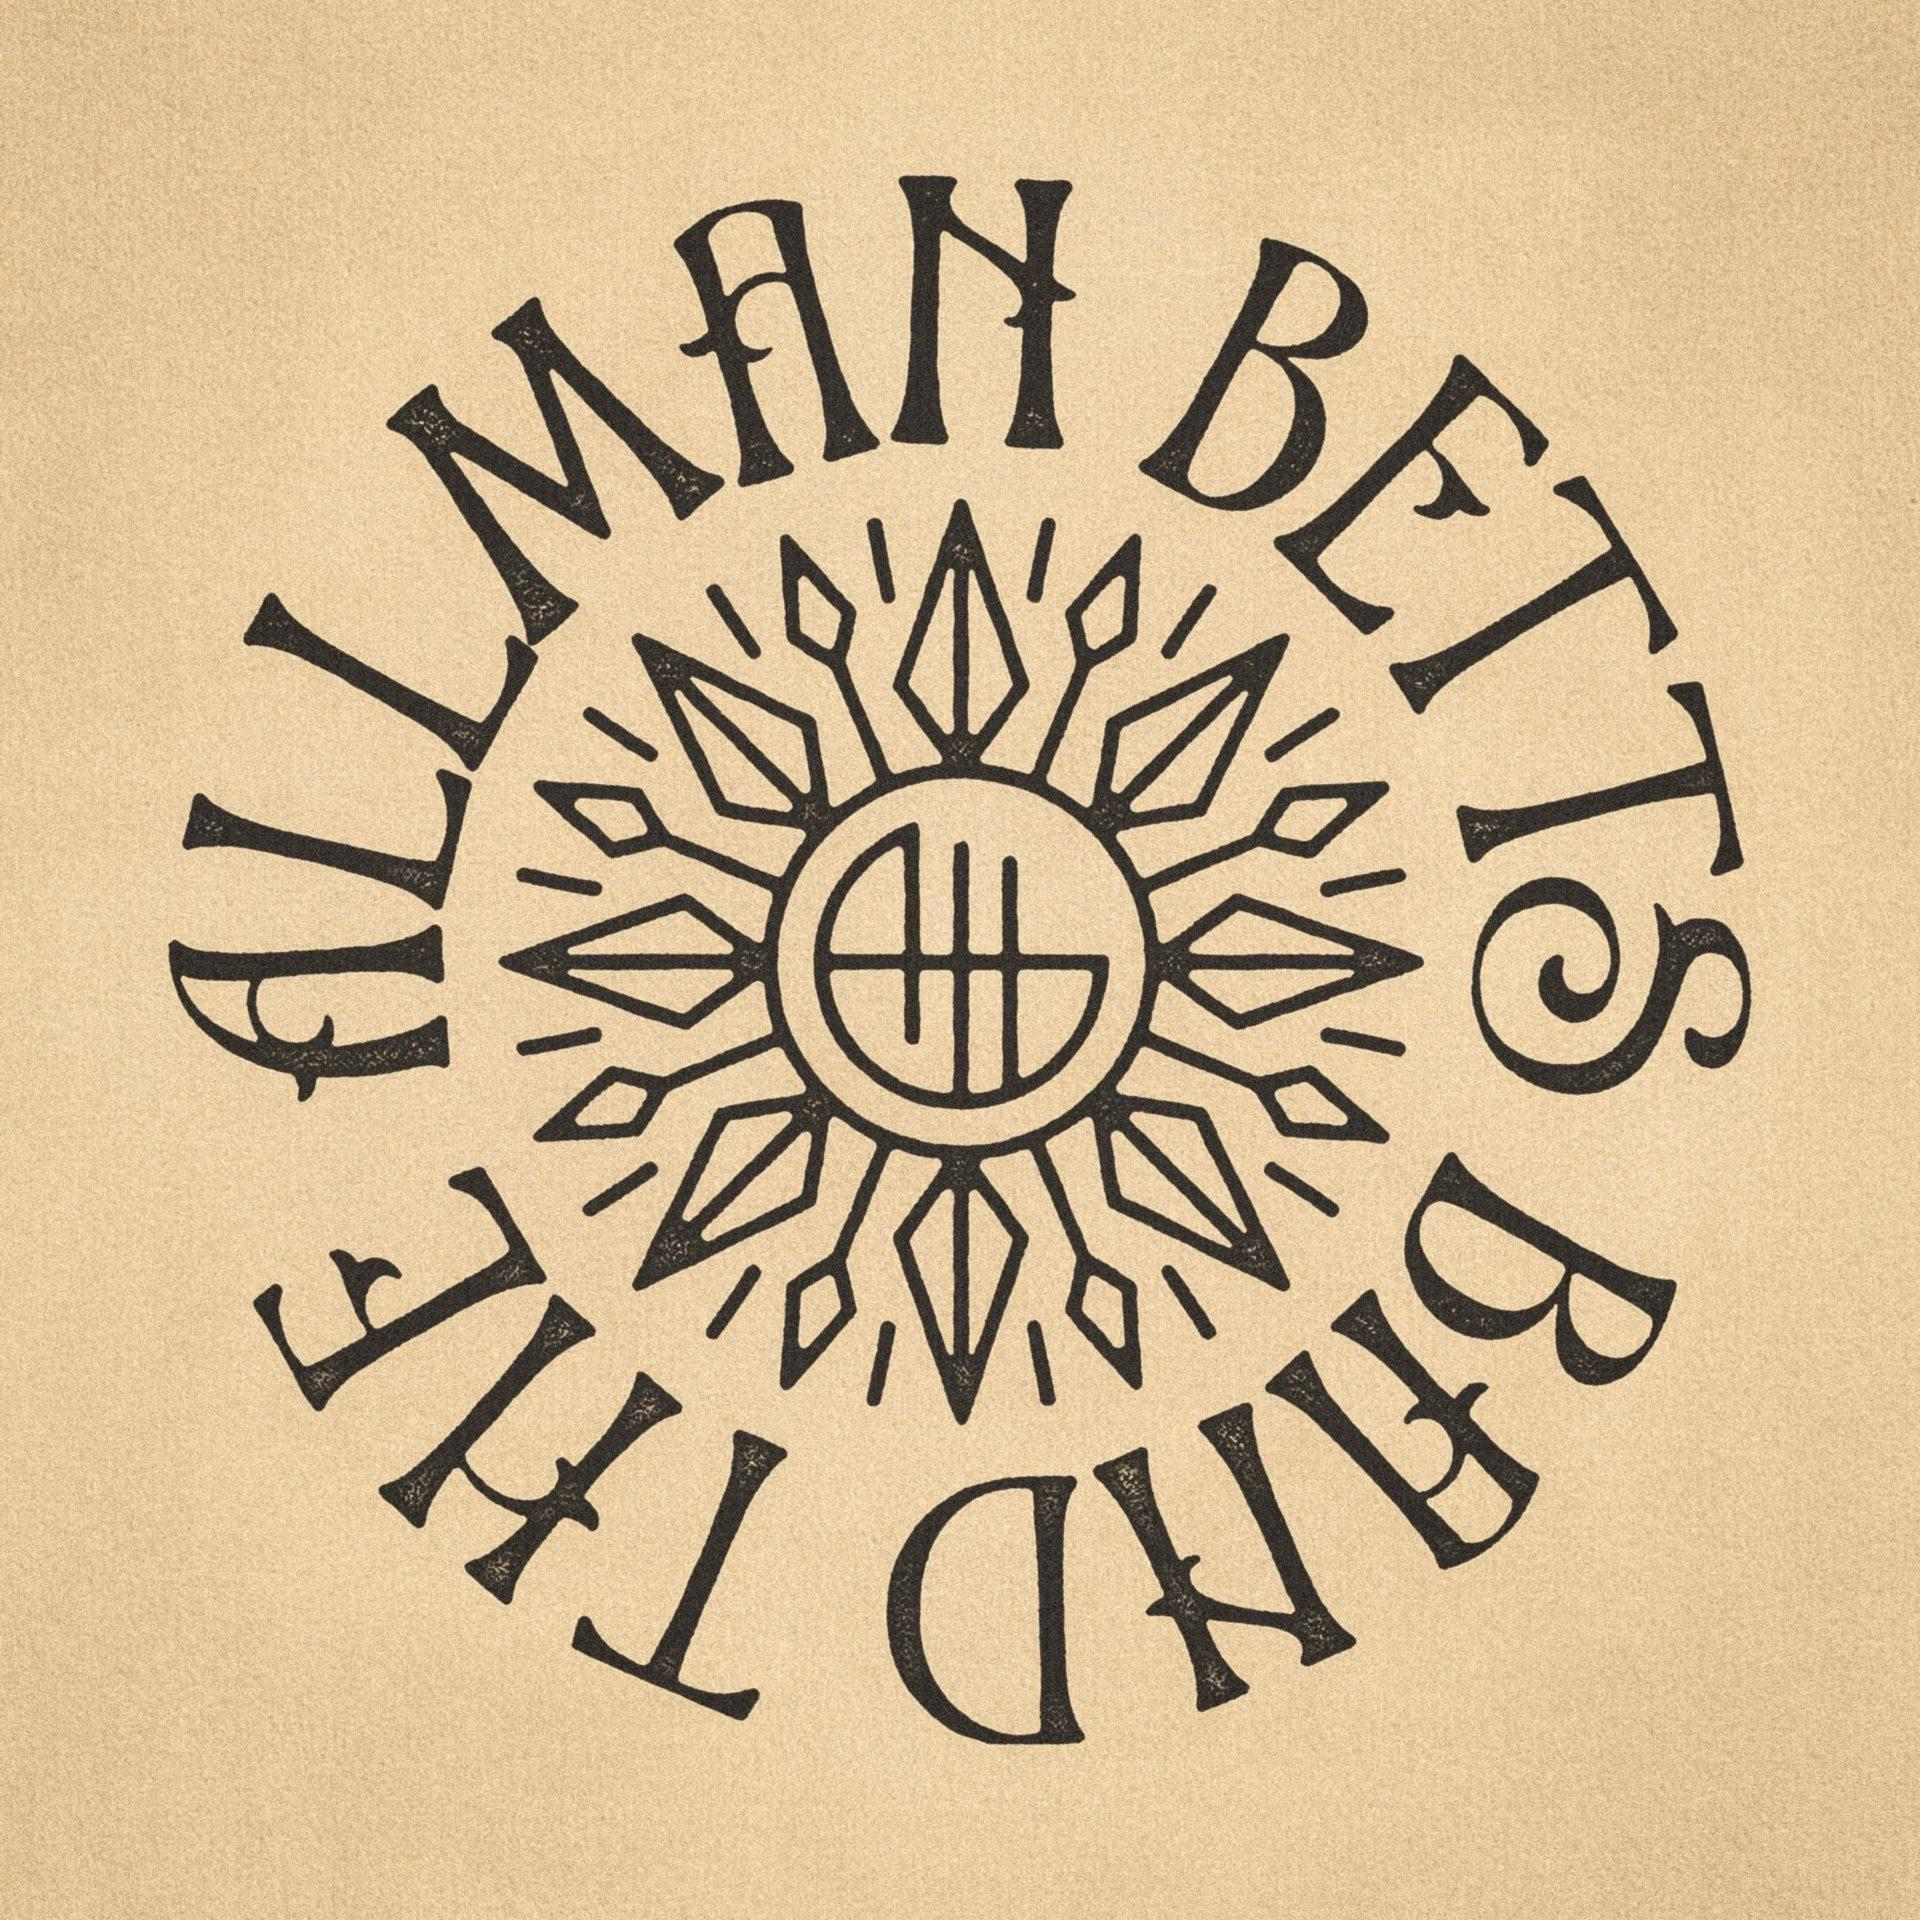 Allman THE RIVER Betts Band (CD) DOWN - - TO